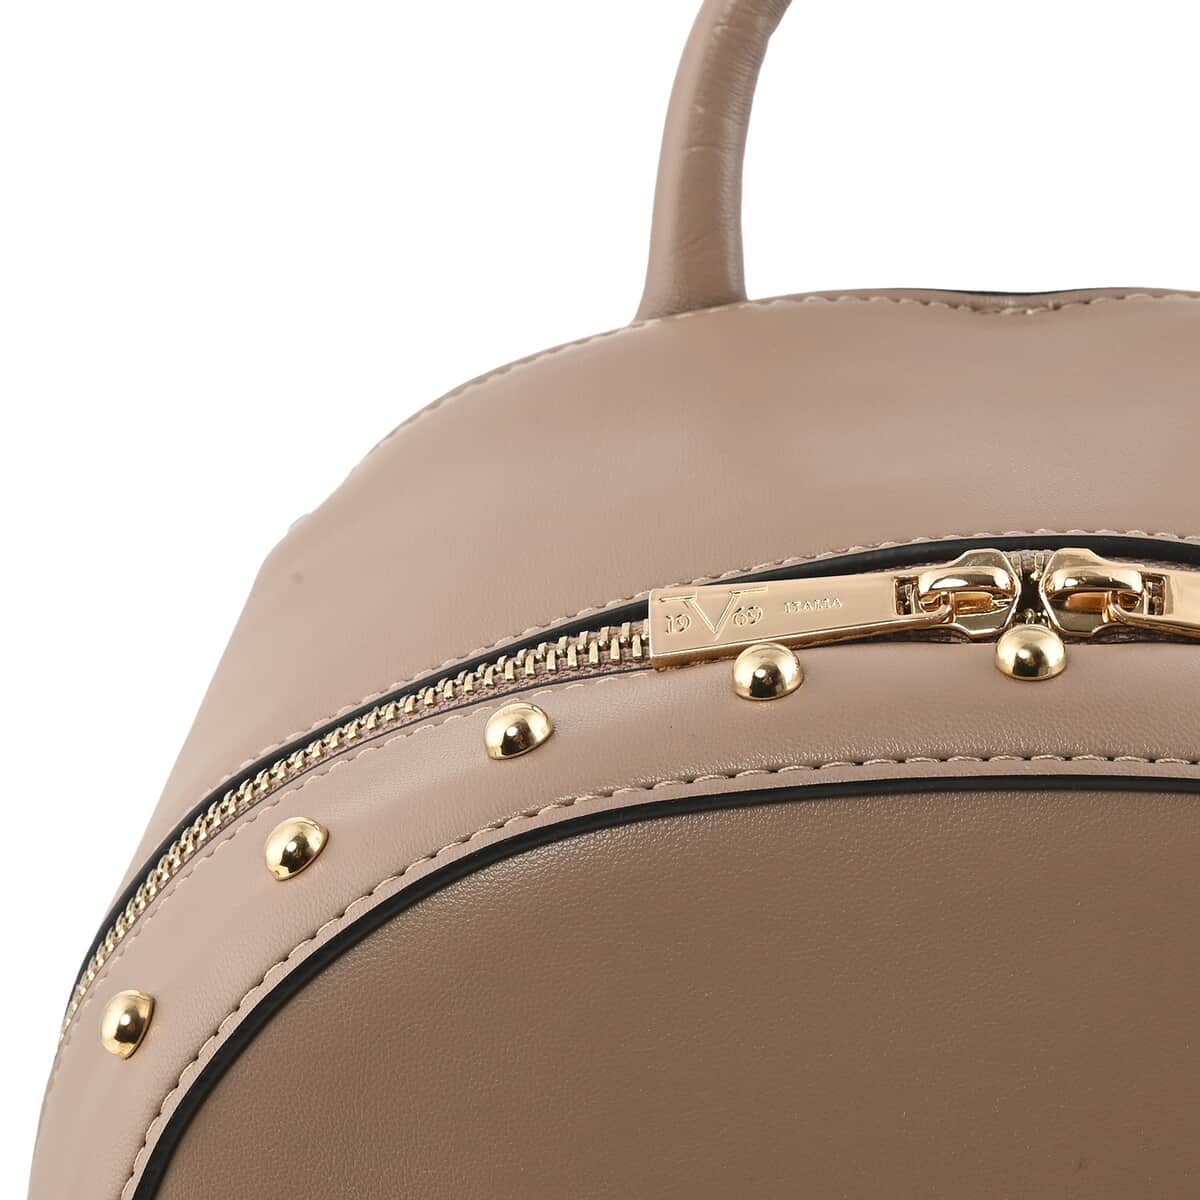 19V69 ITALIA by Alessandro Versace Smooth Texture Faux Leather Backpack with Detachable Strap - Beige (12X9.5X4.75) image number 4